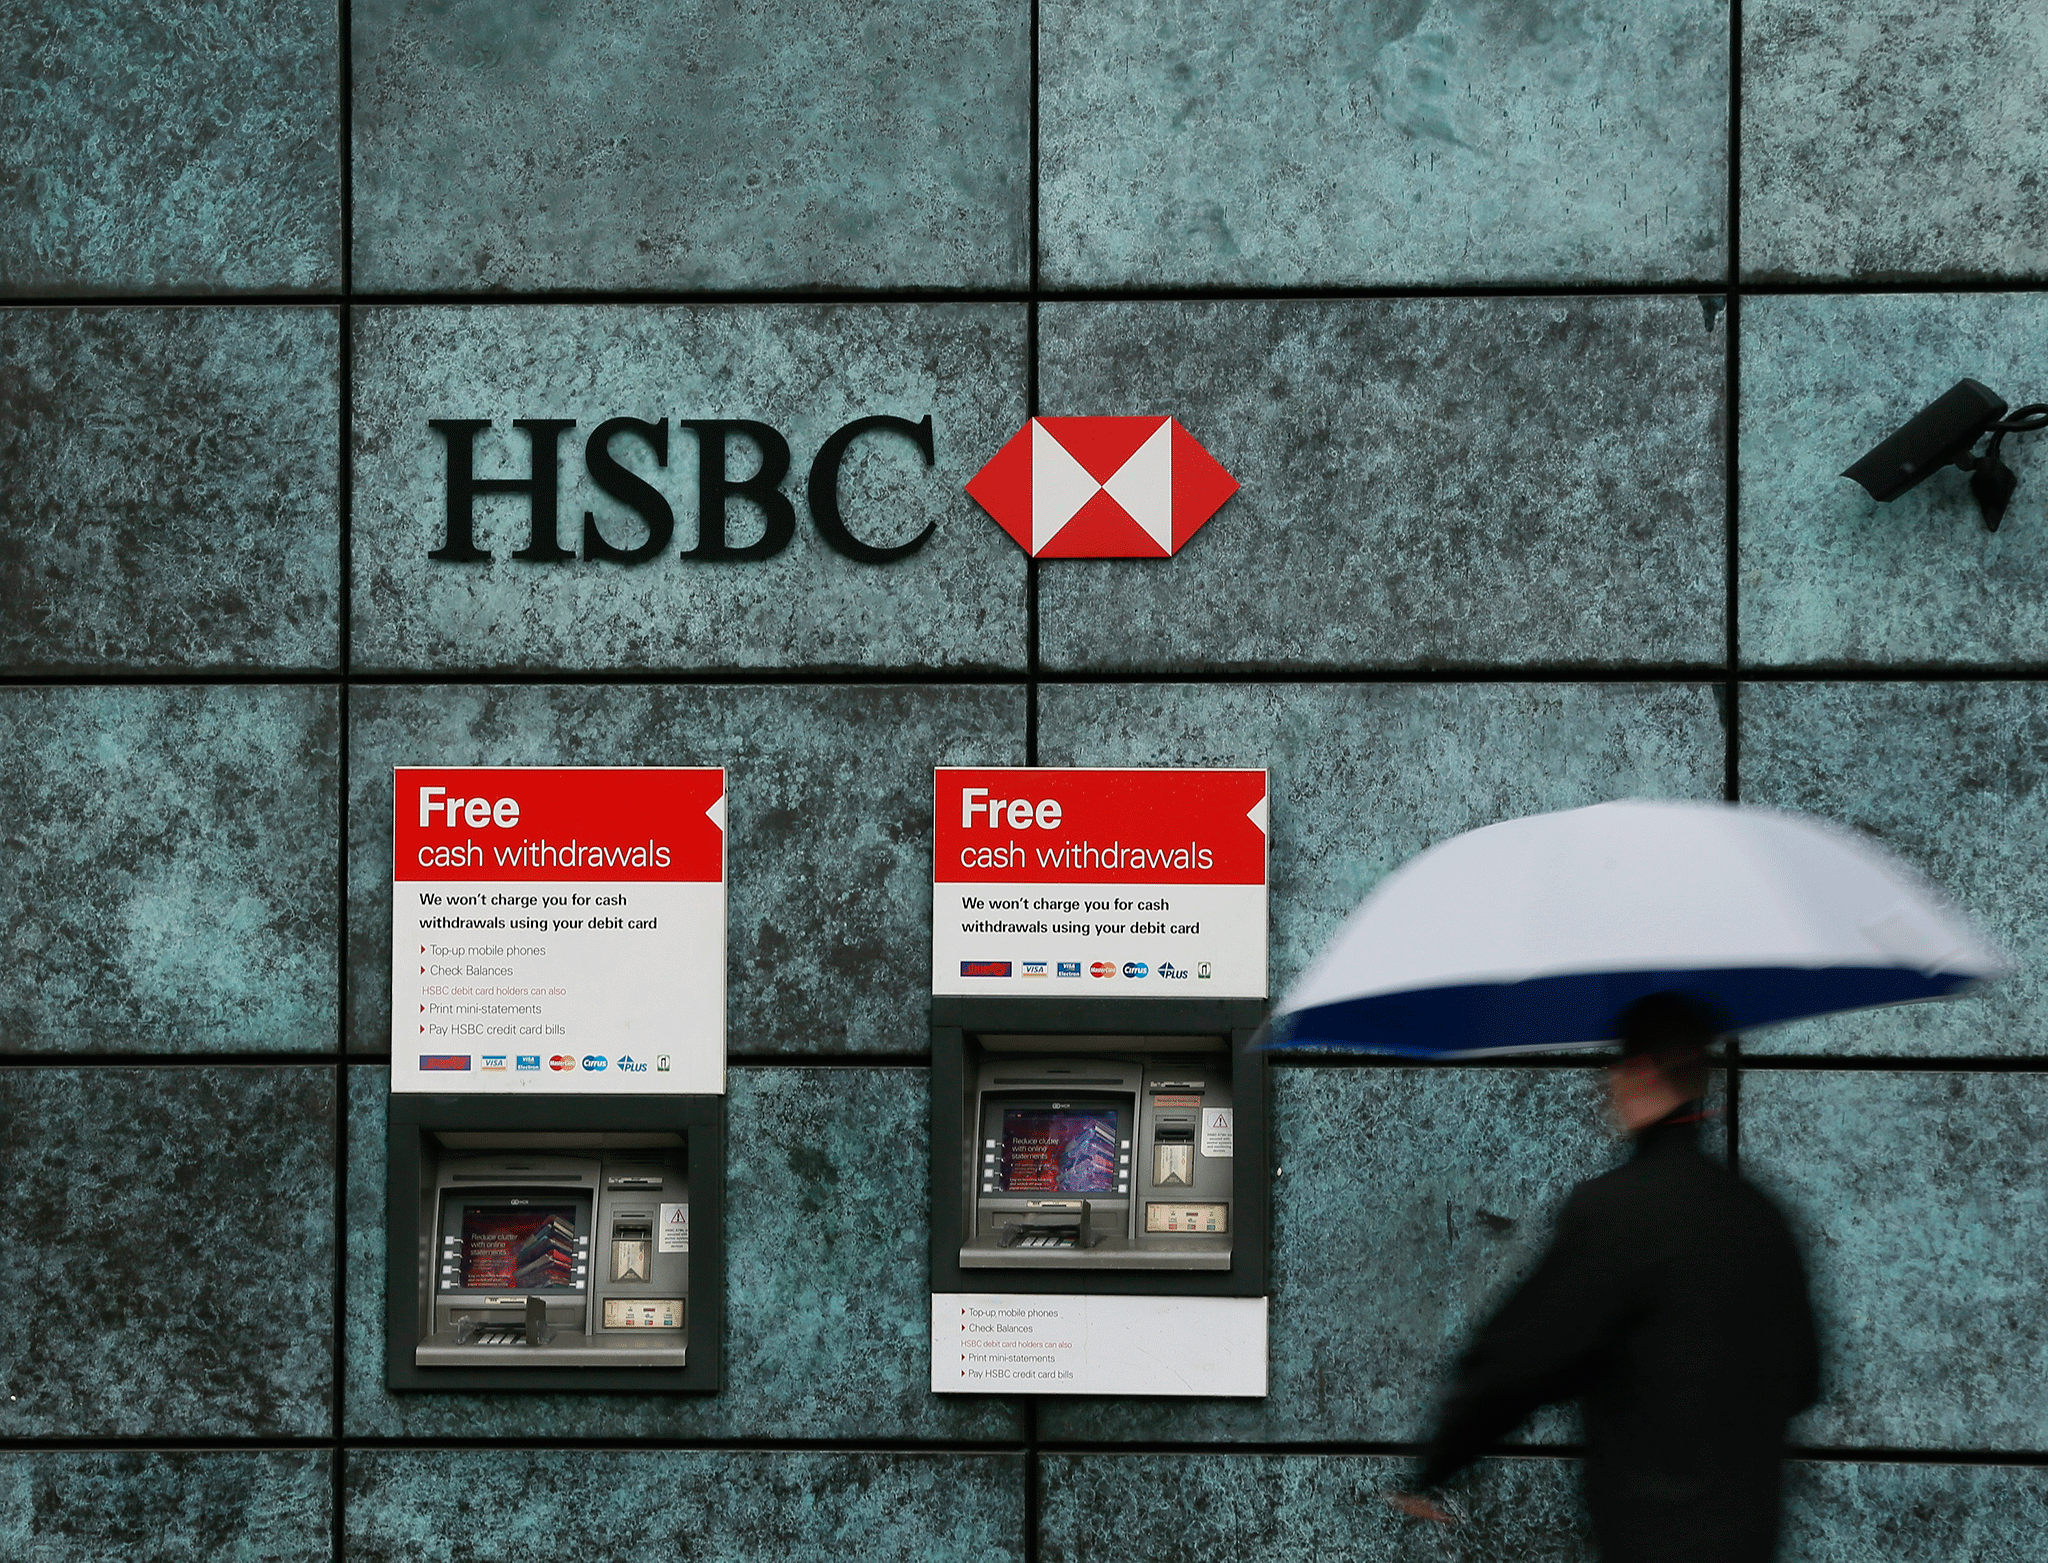 HSBC has caught £4m of fraud attempts since introducing the voice recognition tool just under a year ago